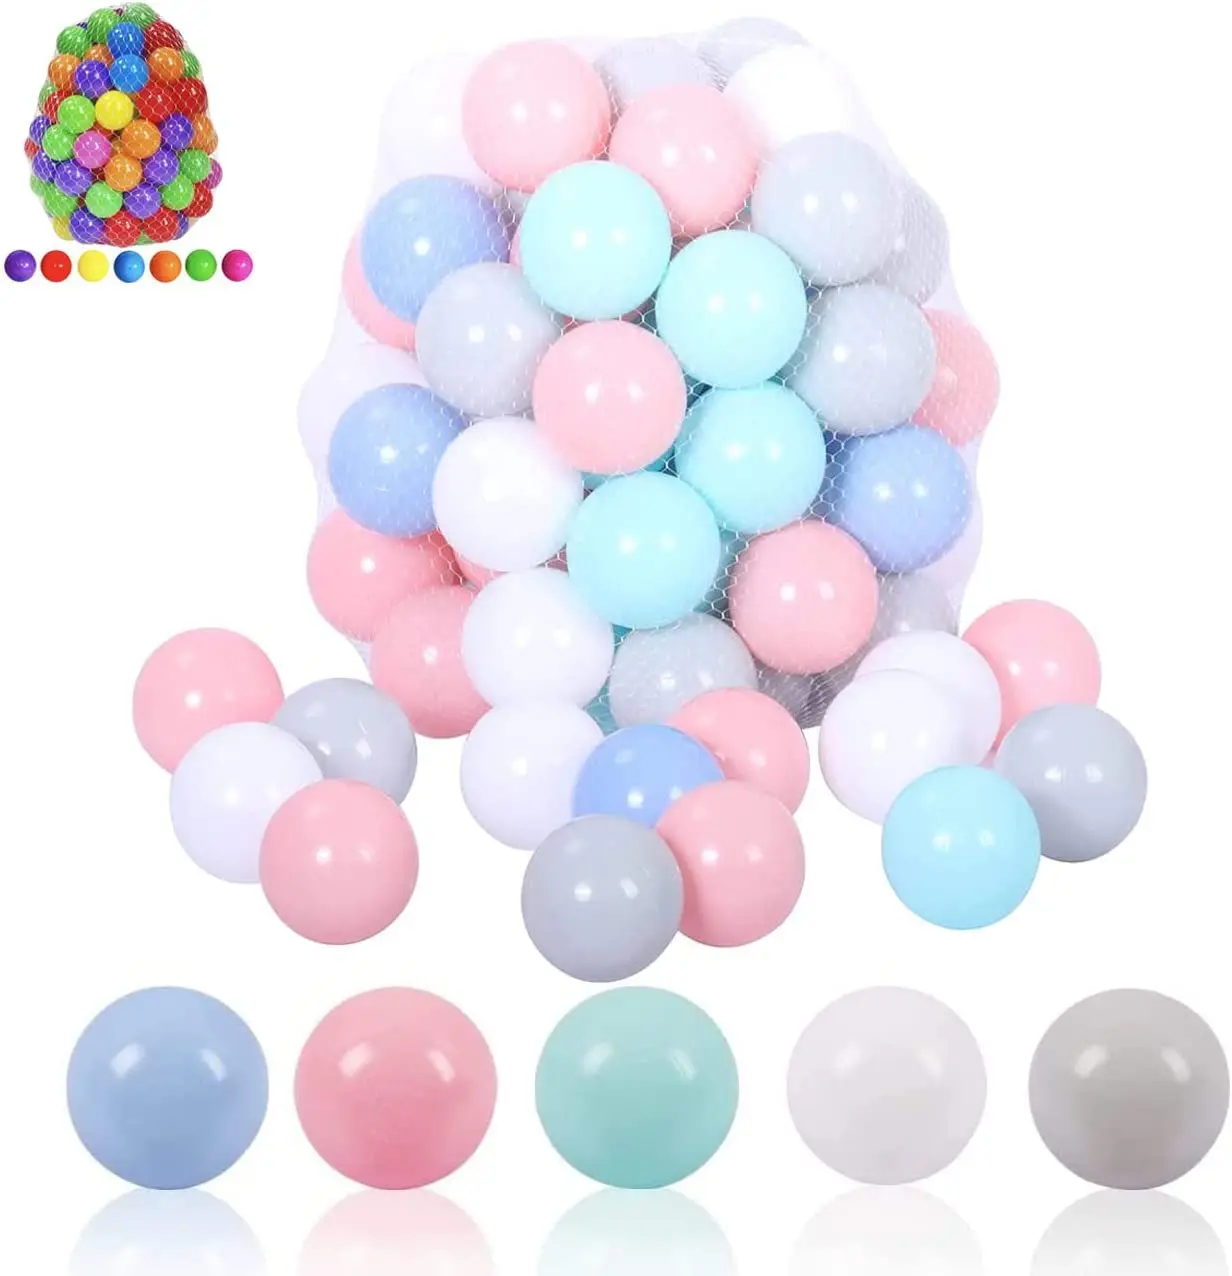 50PCS Soft Plastic Ball Pit Balls for Kids Baby Toddler Play Tent Pool Water Toys Kiddie Pool Party Decoration Photo Booth Props